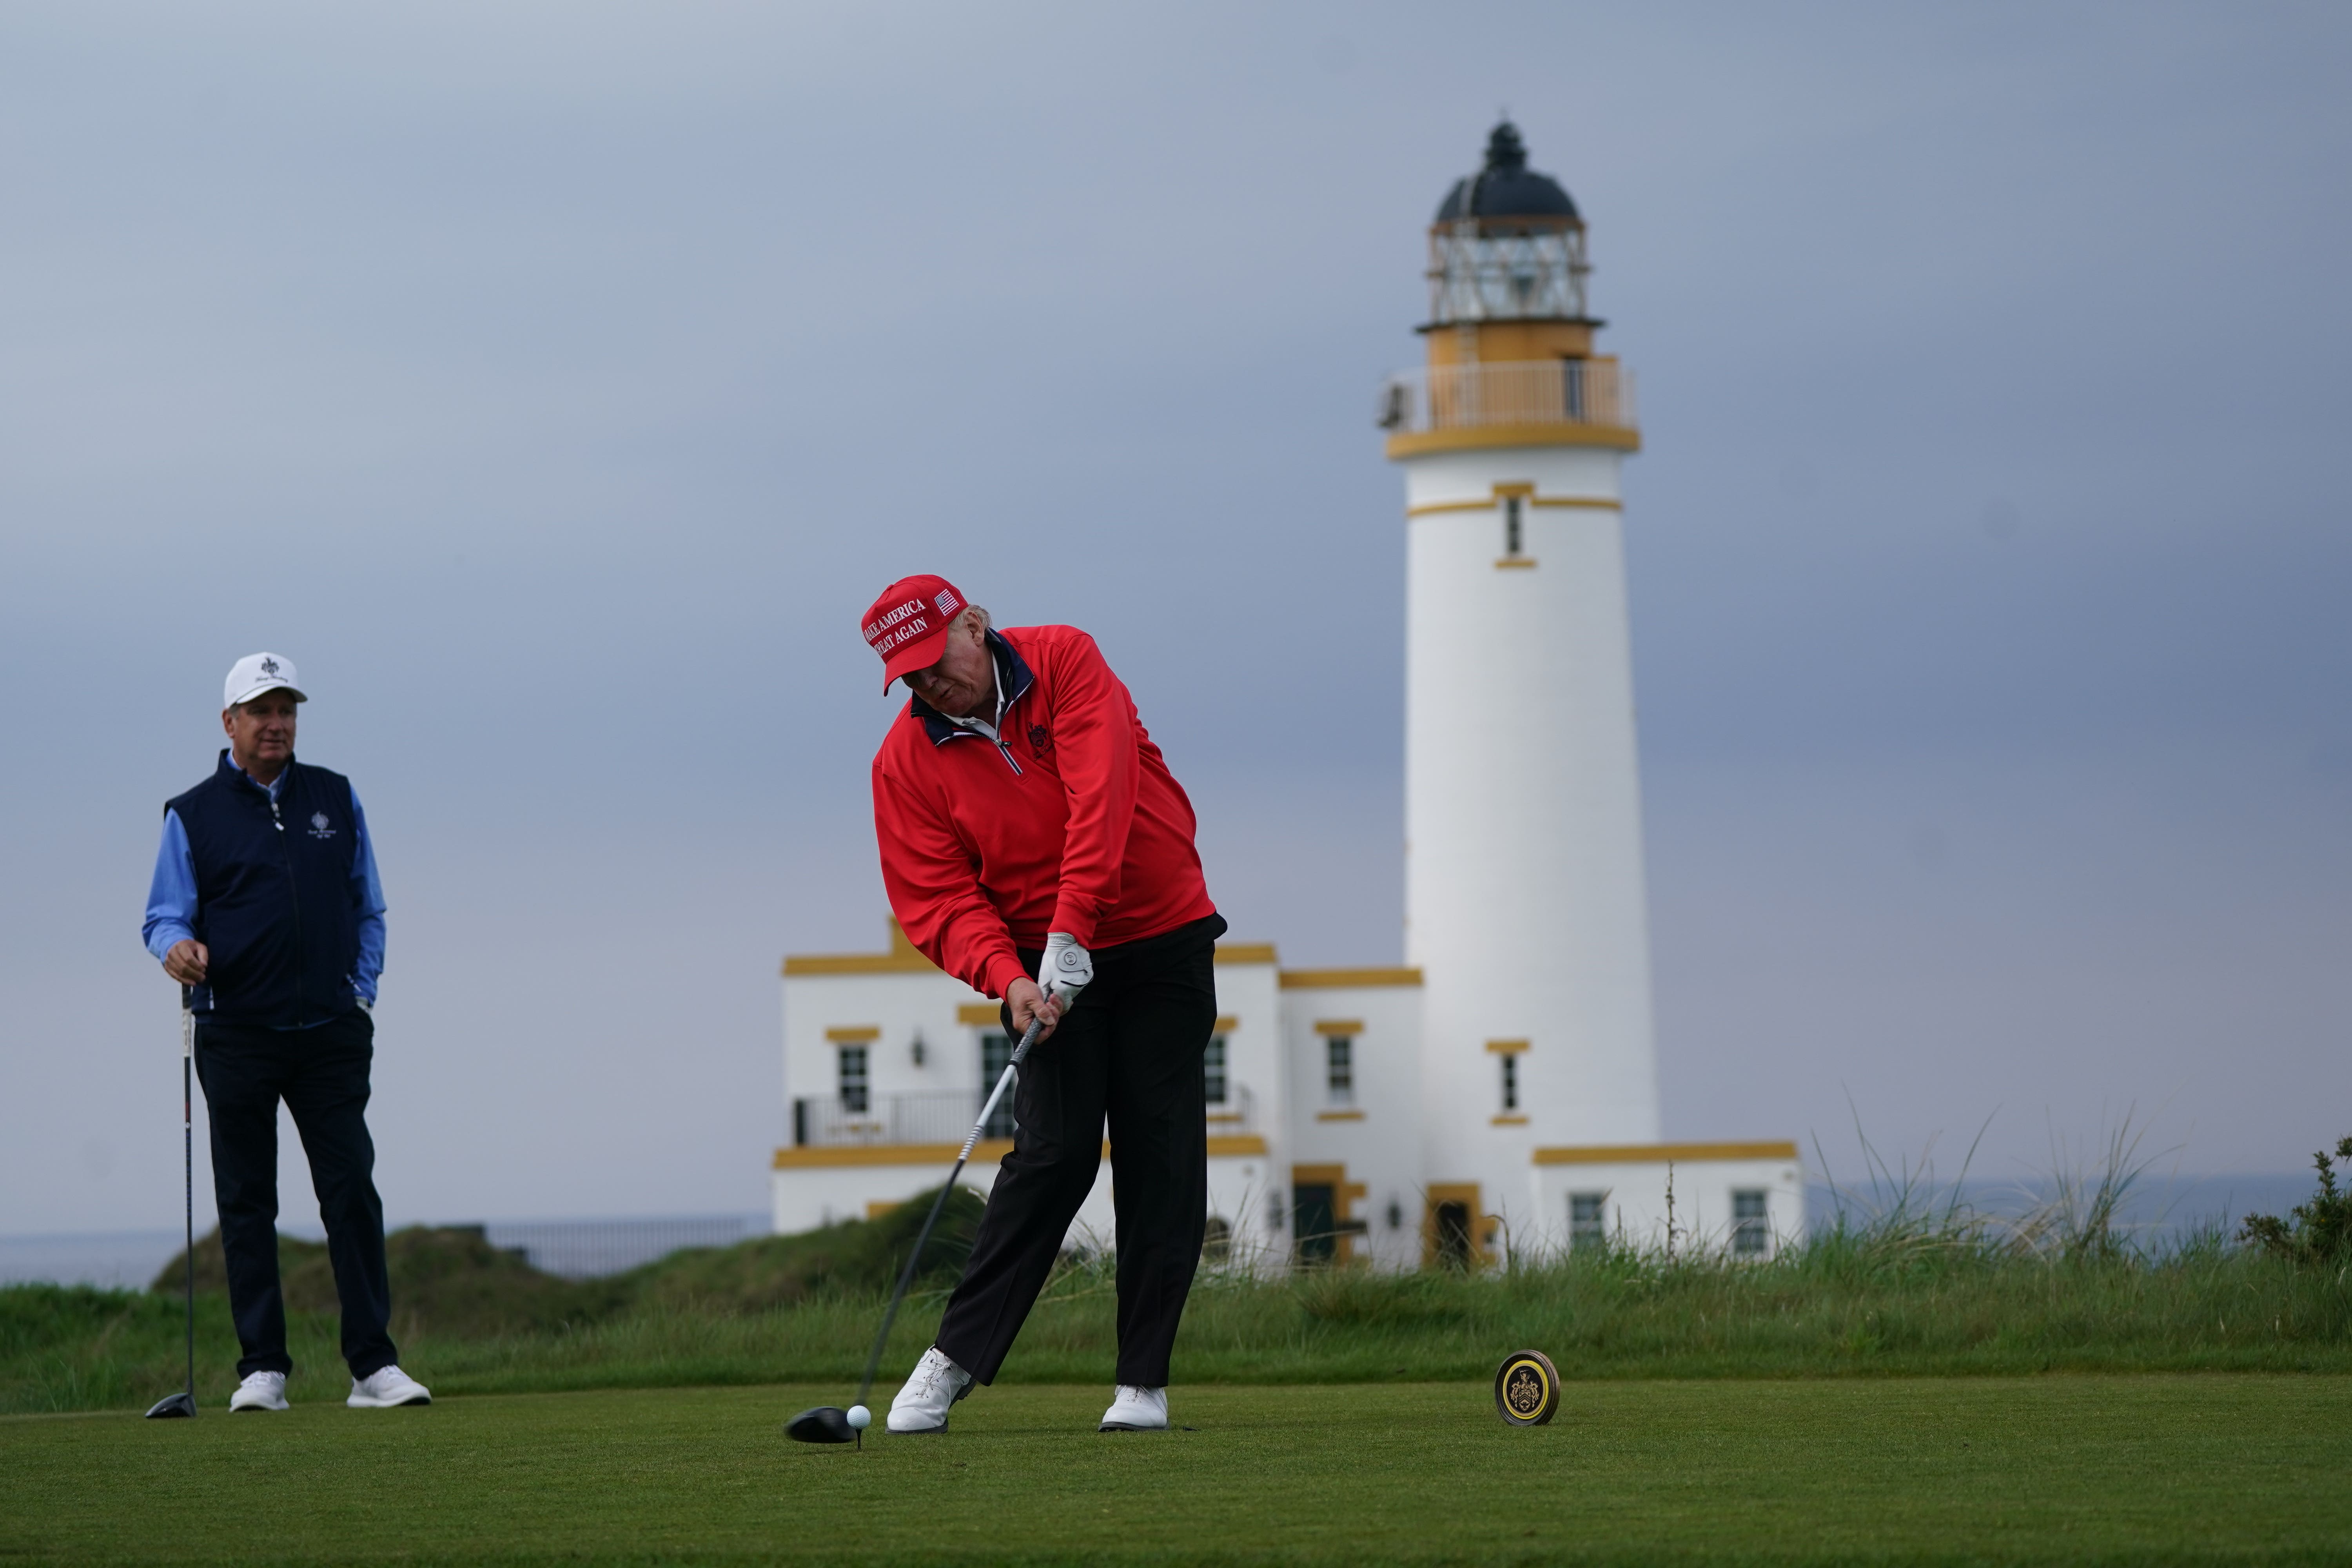 Trump plays golf at Turnberry course on third day of Scotland visit ...